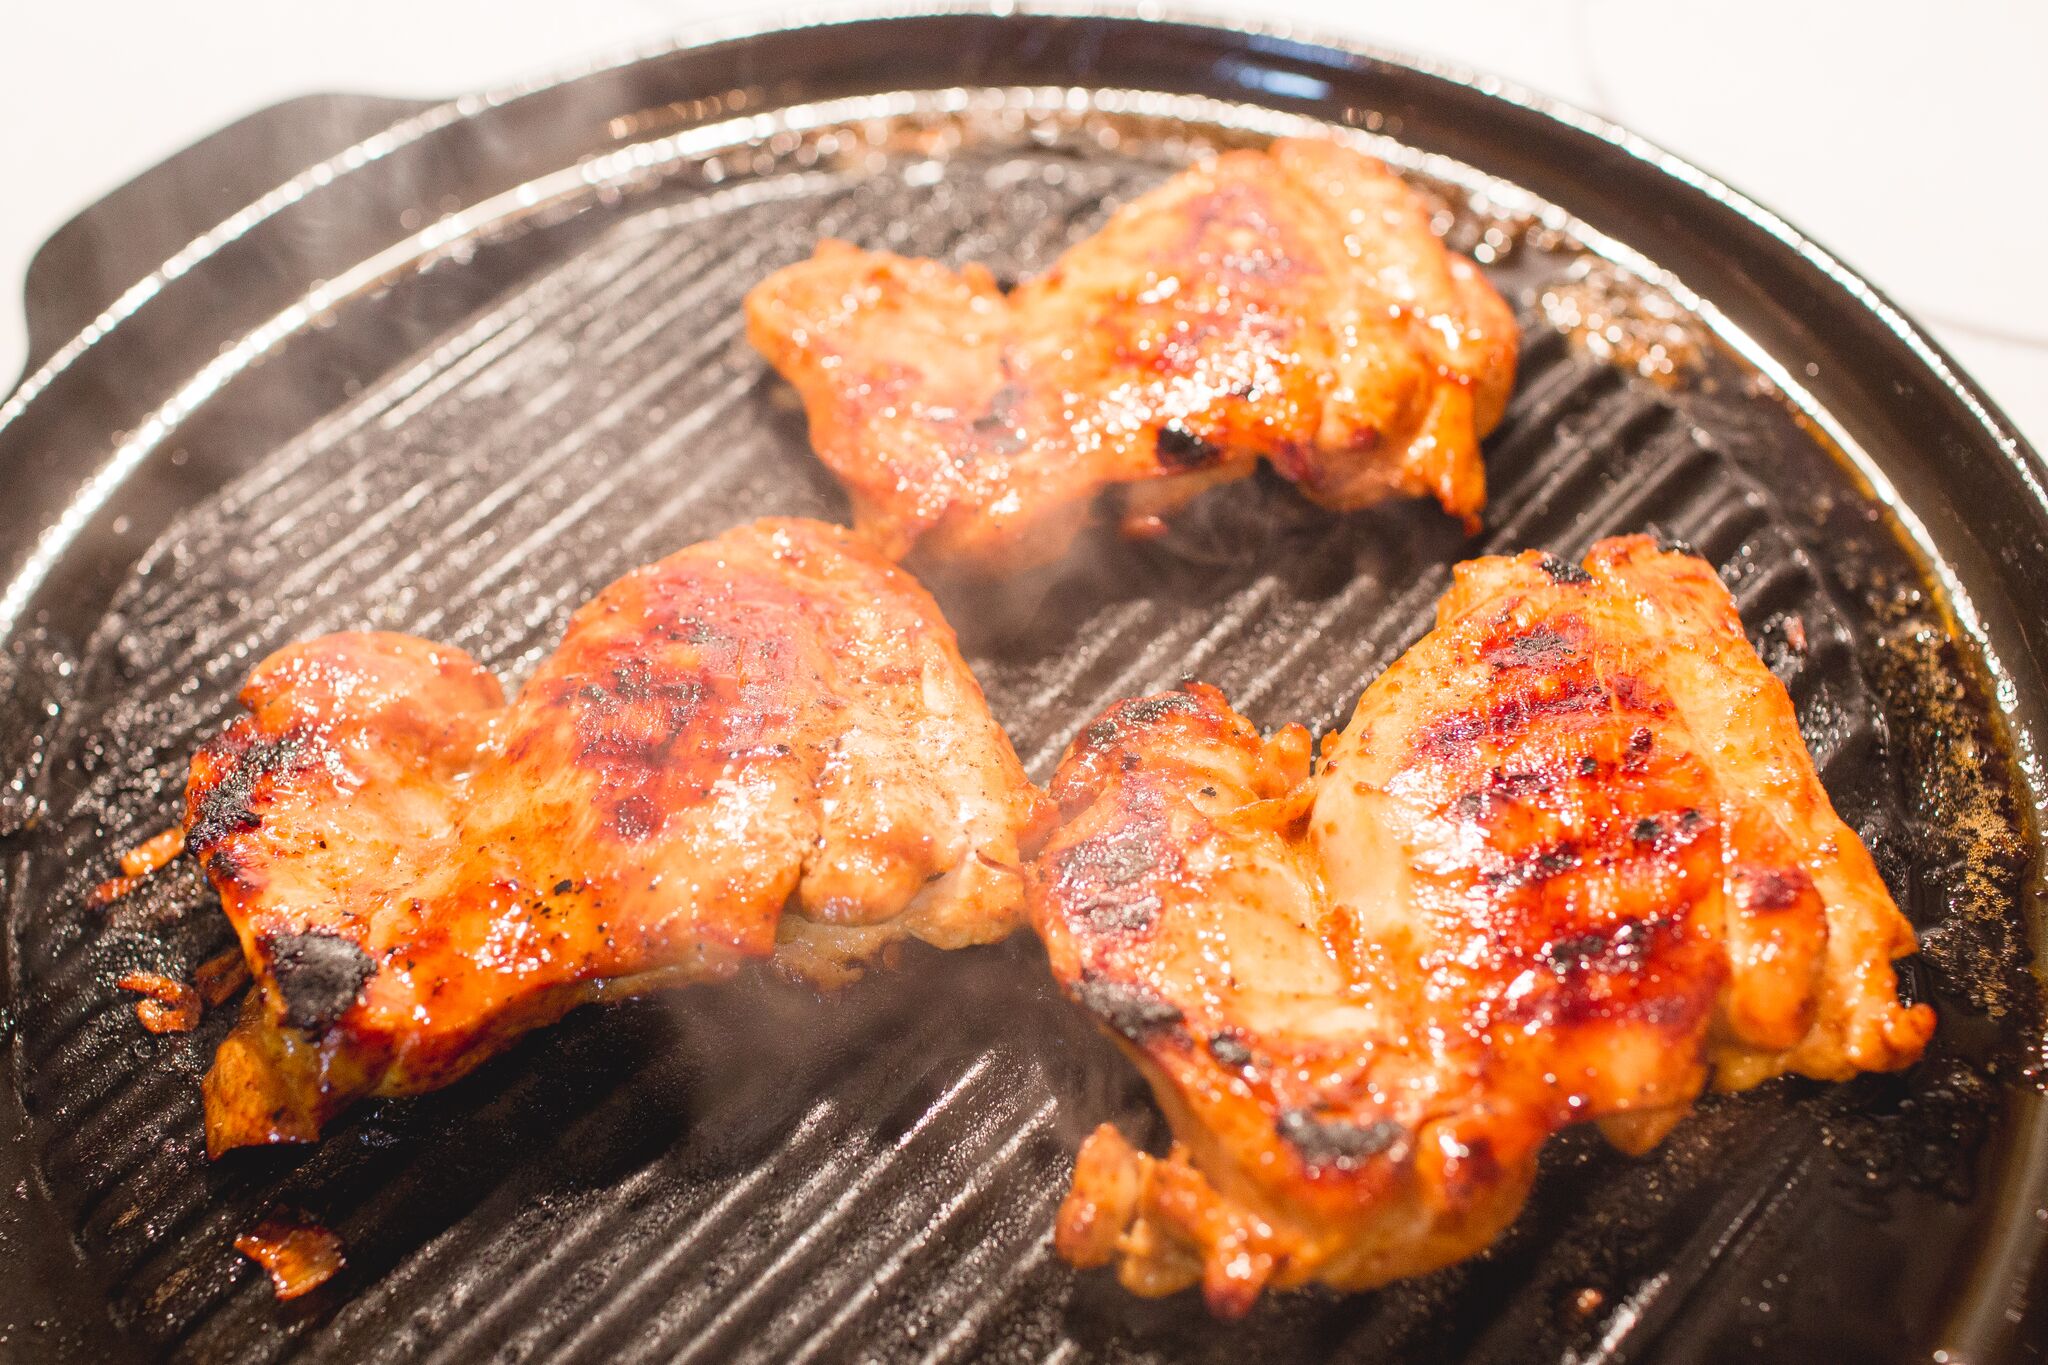 Grill chicken while basting with additional marinade.